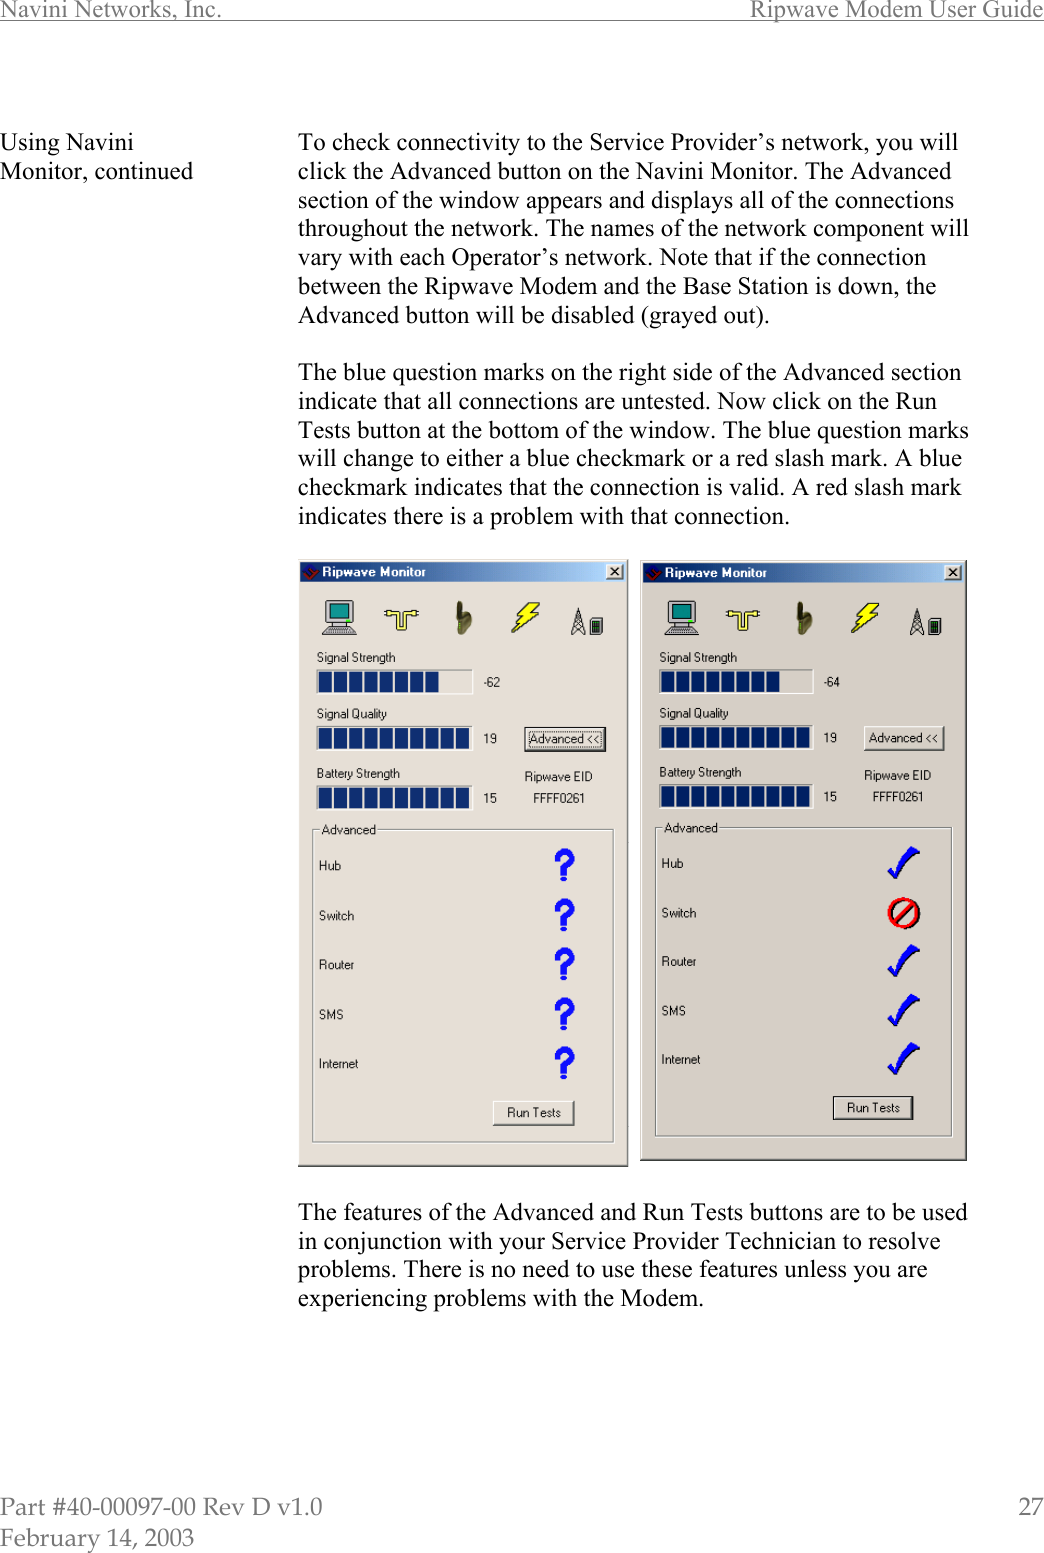 Navini Networks, Inc.        Ripwave Modem User Guide Part #40-00097-00 Rev D v1.0                         27 February 14, 2003  Using Navini Monitor, continued                                             To check connectivity to the Service Provider’s network, you will click the Advanced button on the Navini Monitor. The Advanced section of the window appears and displays all of the connections throughout the network. The names of the network component will vary with each Operator’s network. Note that if the connection between the Ripwave Modem and the Base Station is down, the Advanced button will be disabled (grayed out).  The blue question marks on the right side of the Advanced section indicate that all connections are untested. Now click on the Run Tests button at the bottom of the window. The blue question marks will change to either a blue checkmark or a red slash mark. A blue checkmark indicates that the connection is valid. A red slash mark indicates there is a problem with that connection.    The features of the Advanced and Run Tests buttons are to be used in conjunction with your Service Provider Technician to resolve problems. There is no need to use these features unless you are experiencing problems with the Modem.       